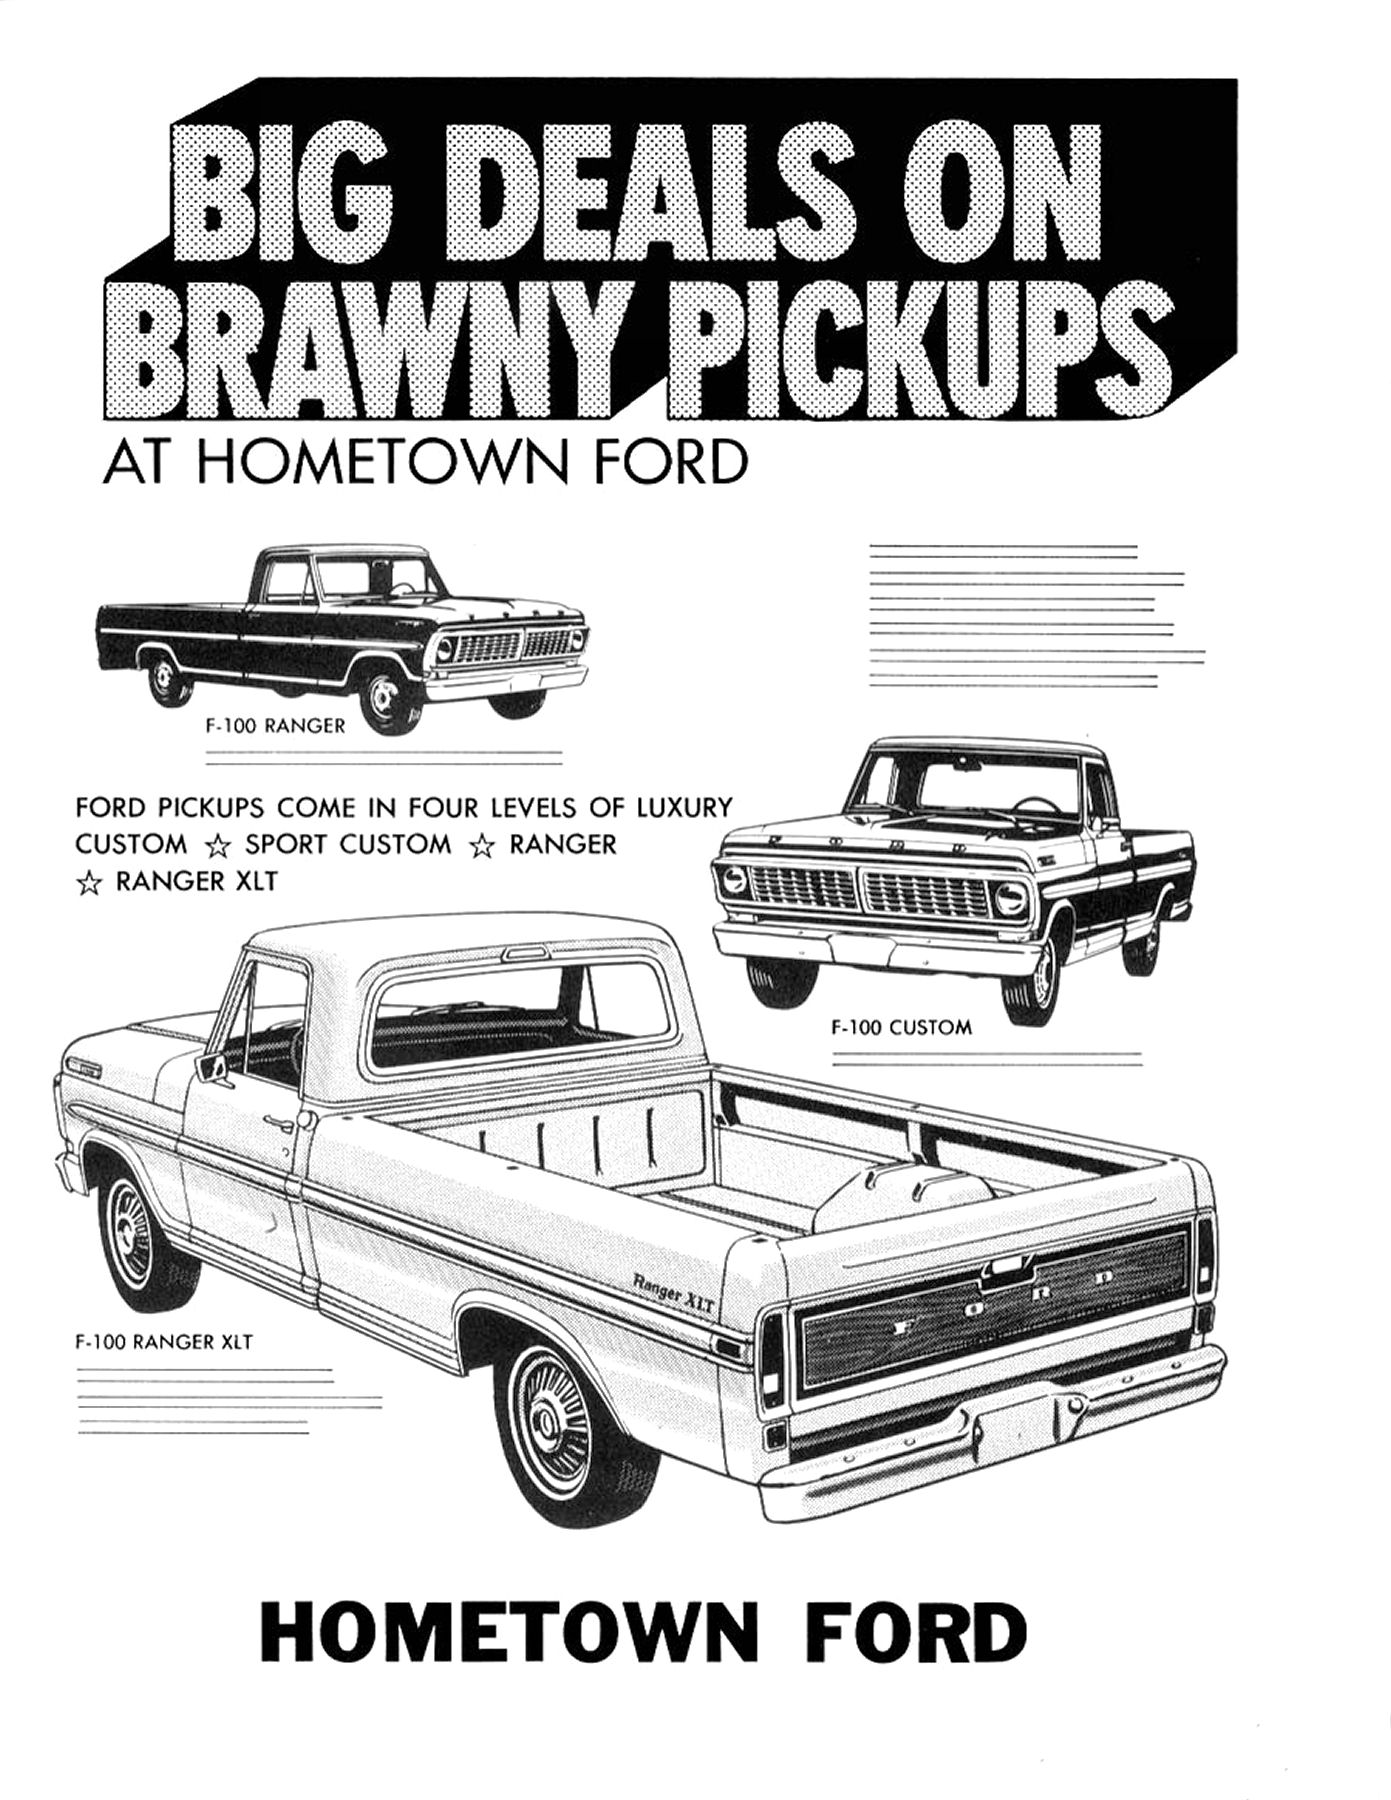 1970 Ford Truck Ad Clipart Book-10